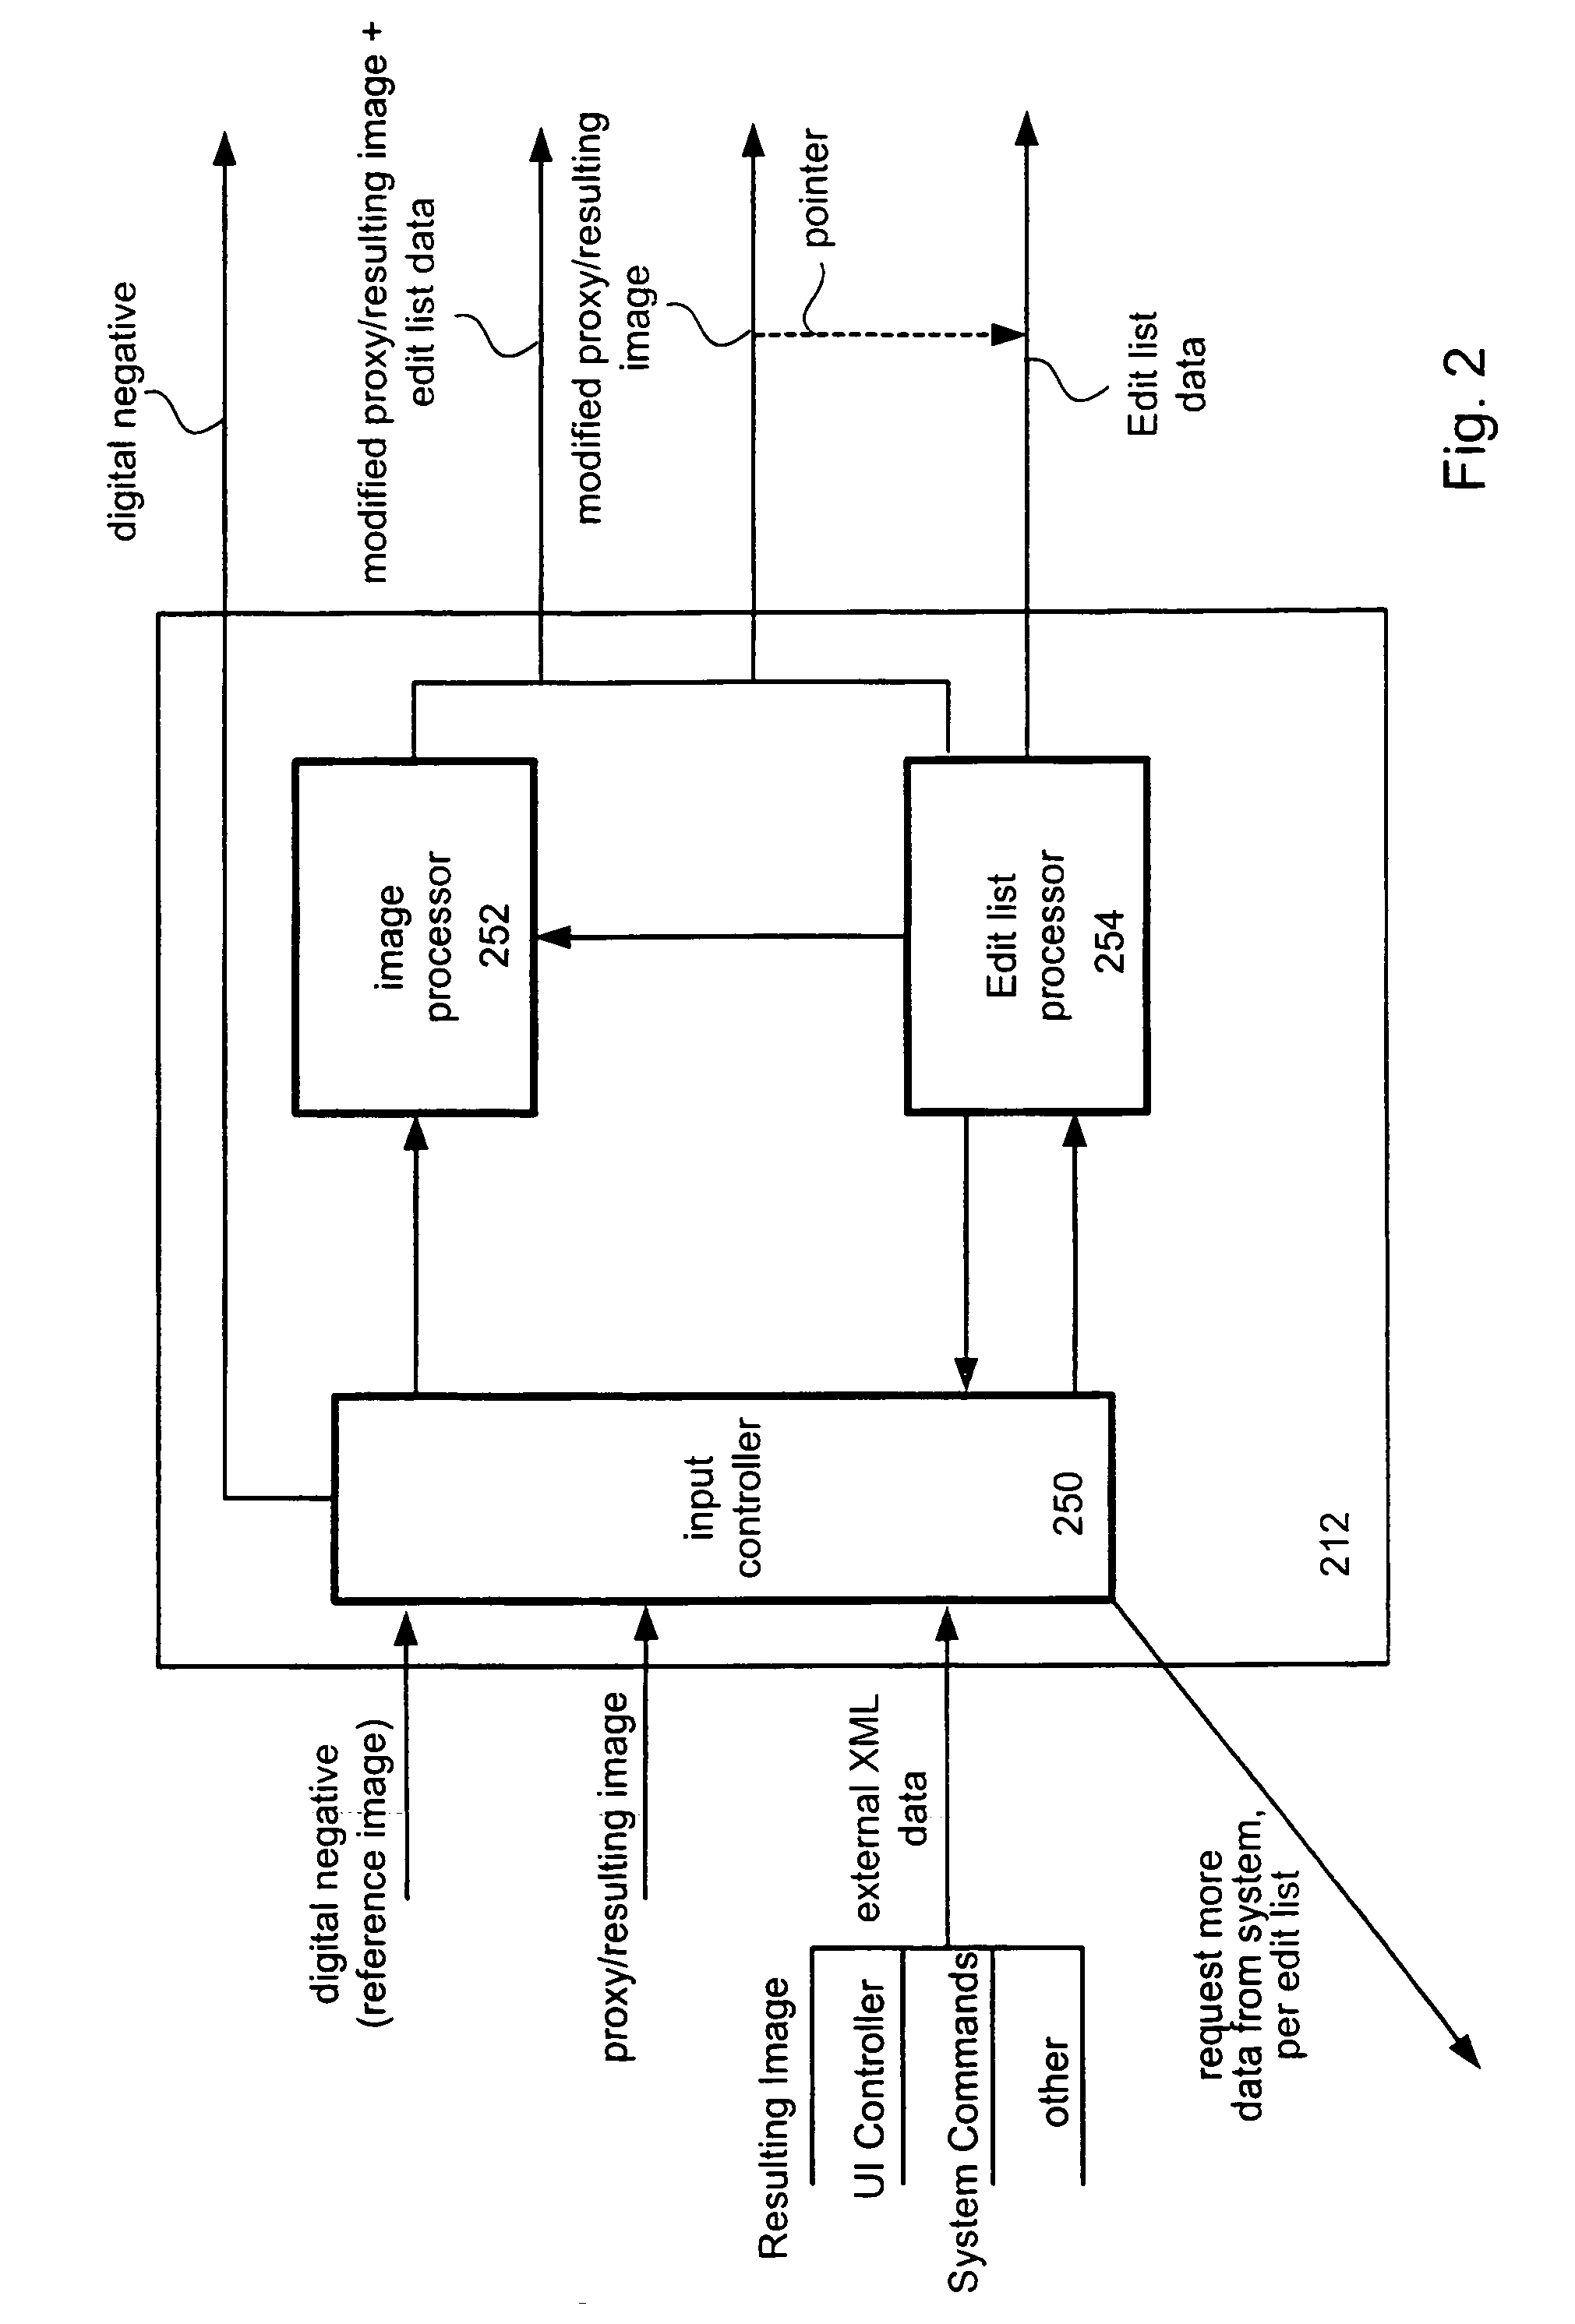 Video-editing workflow methods and apparatus thereof